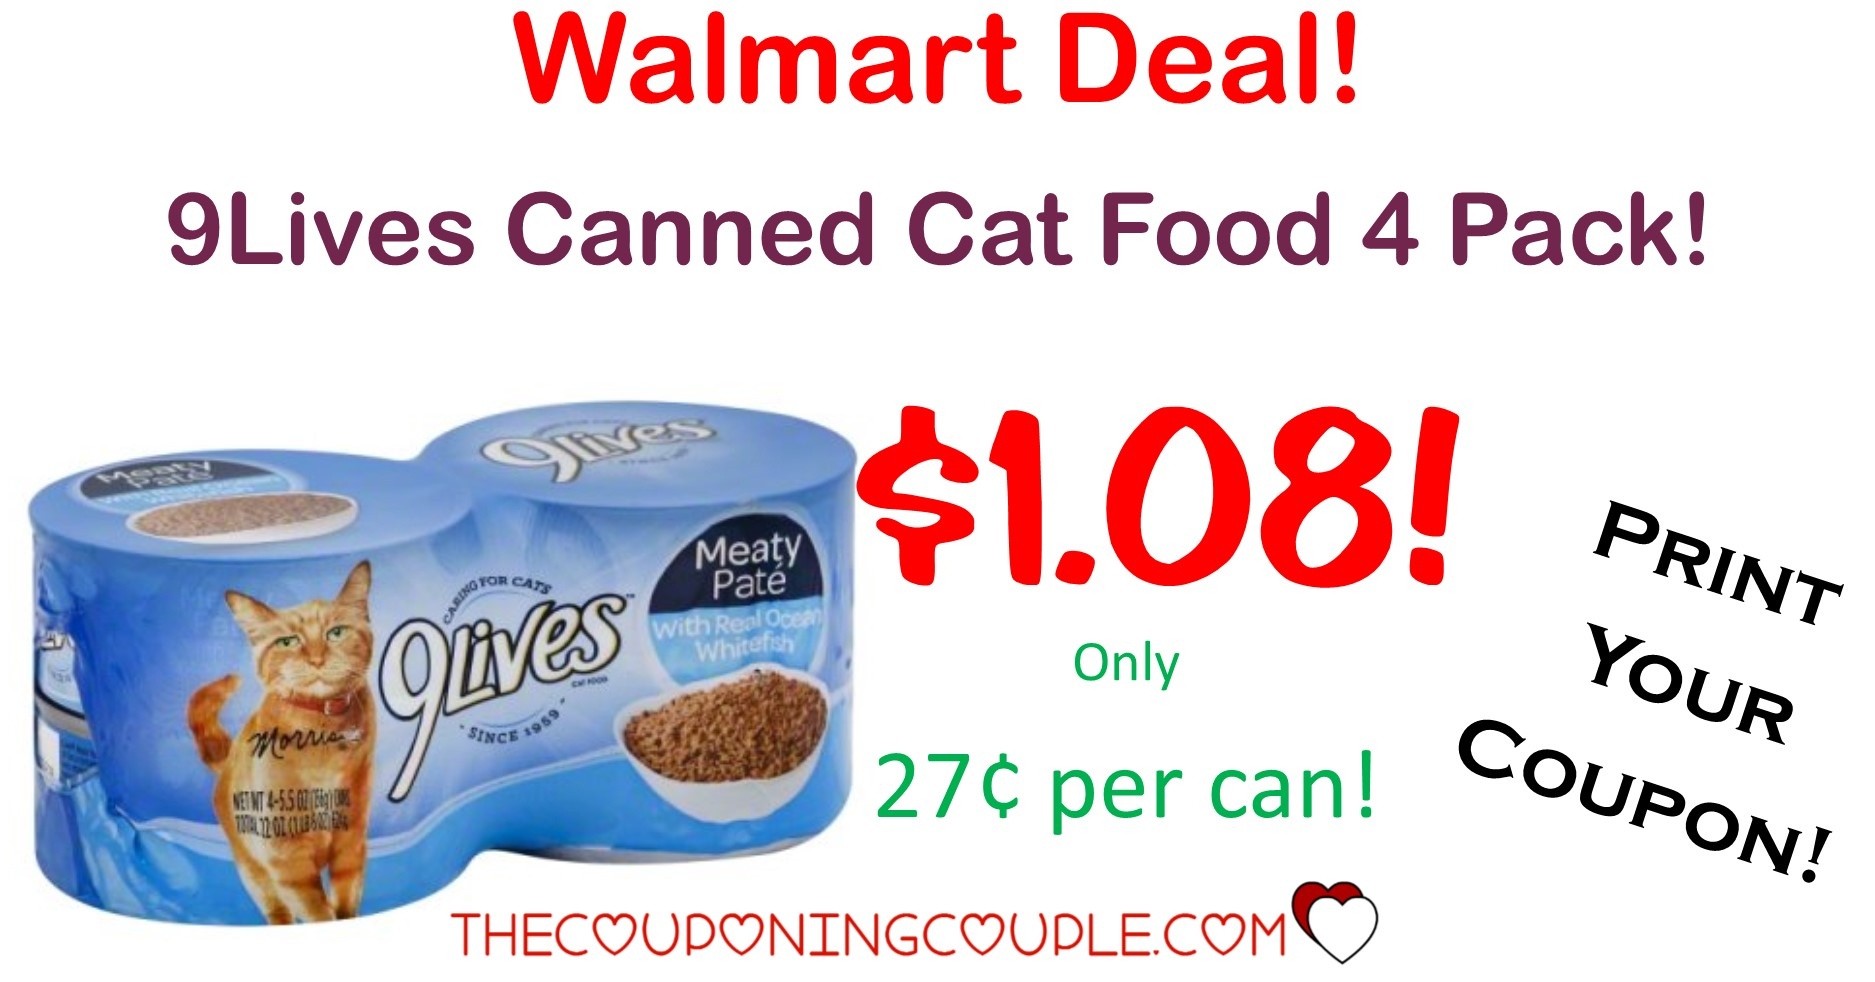 9Lives Canned Cat Food 4 Pack - Only $1.08 With Walmart Deal! - Free Printable 9 Lives Cat Food Coupons